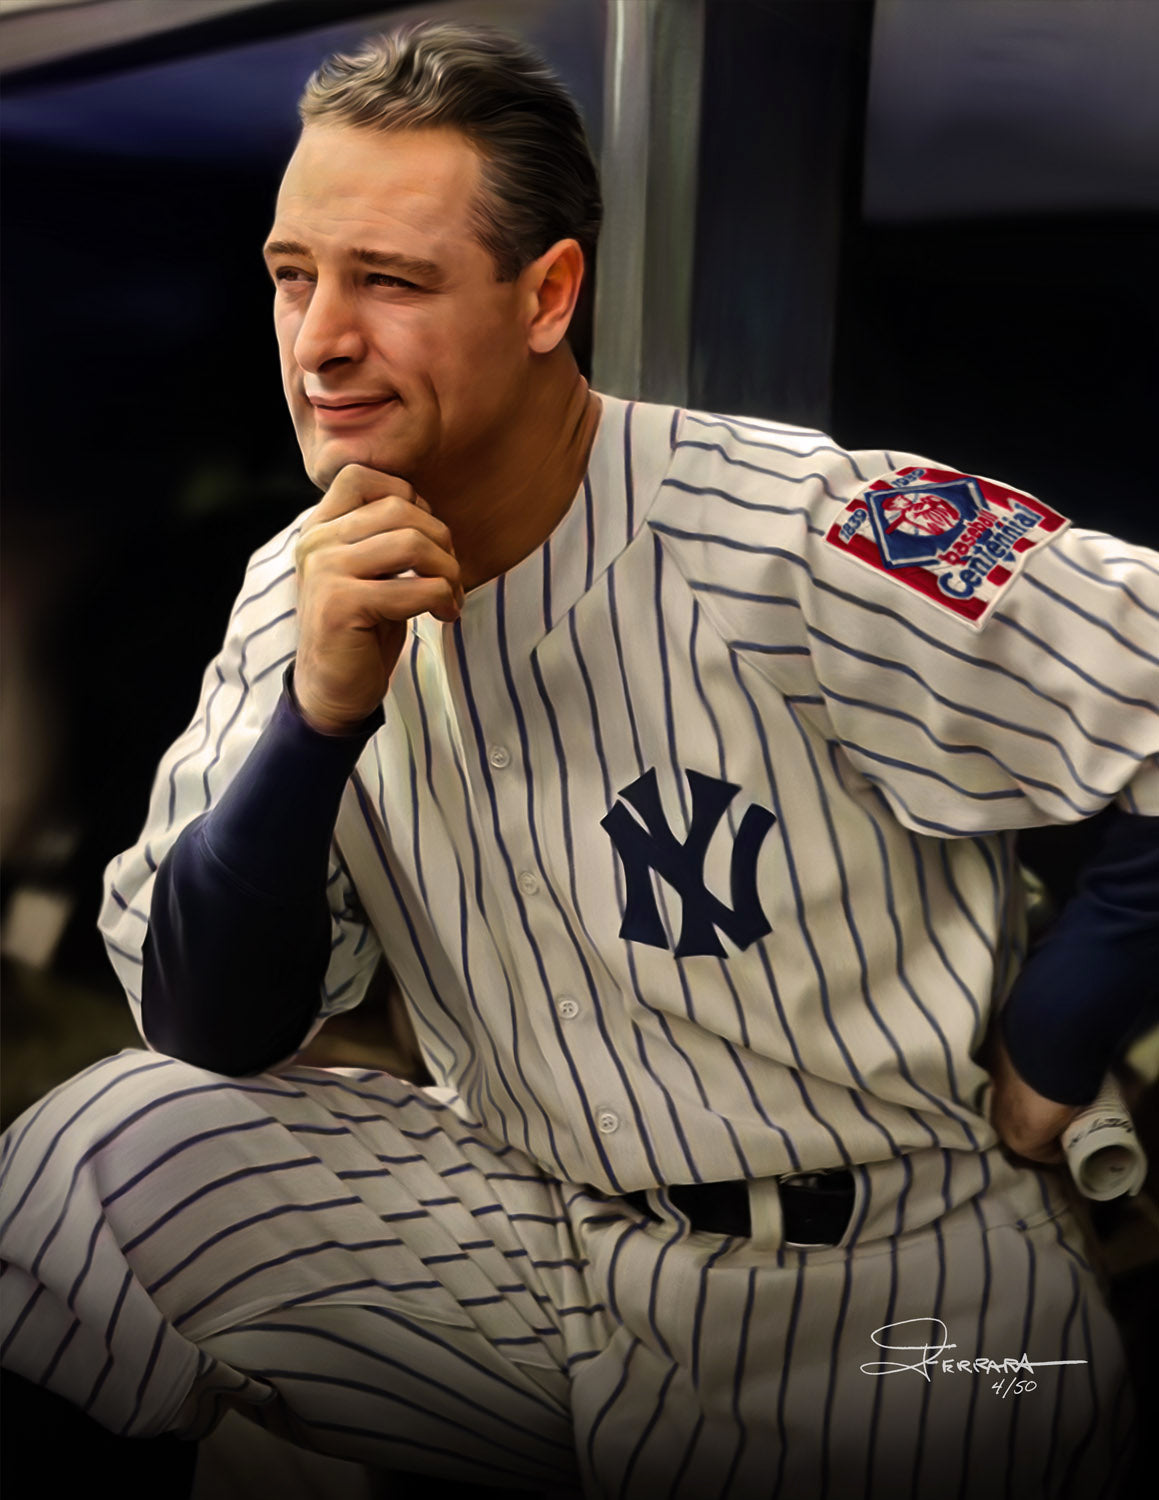 Lou Gehrig (1939), The Iron Horse – ChampionshipArt - The Art of Champions